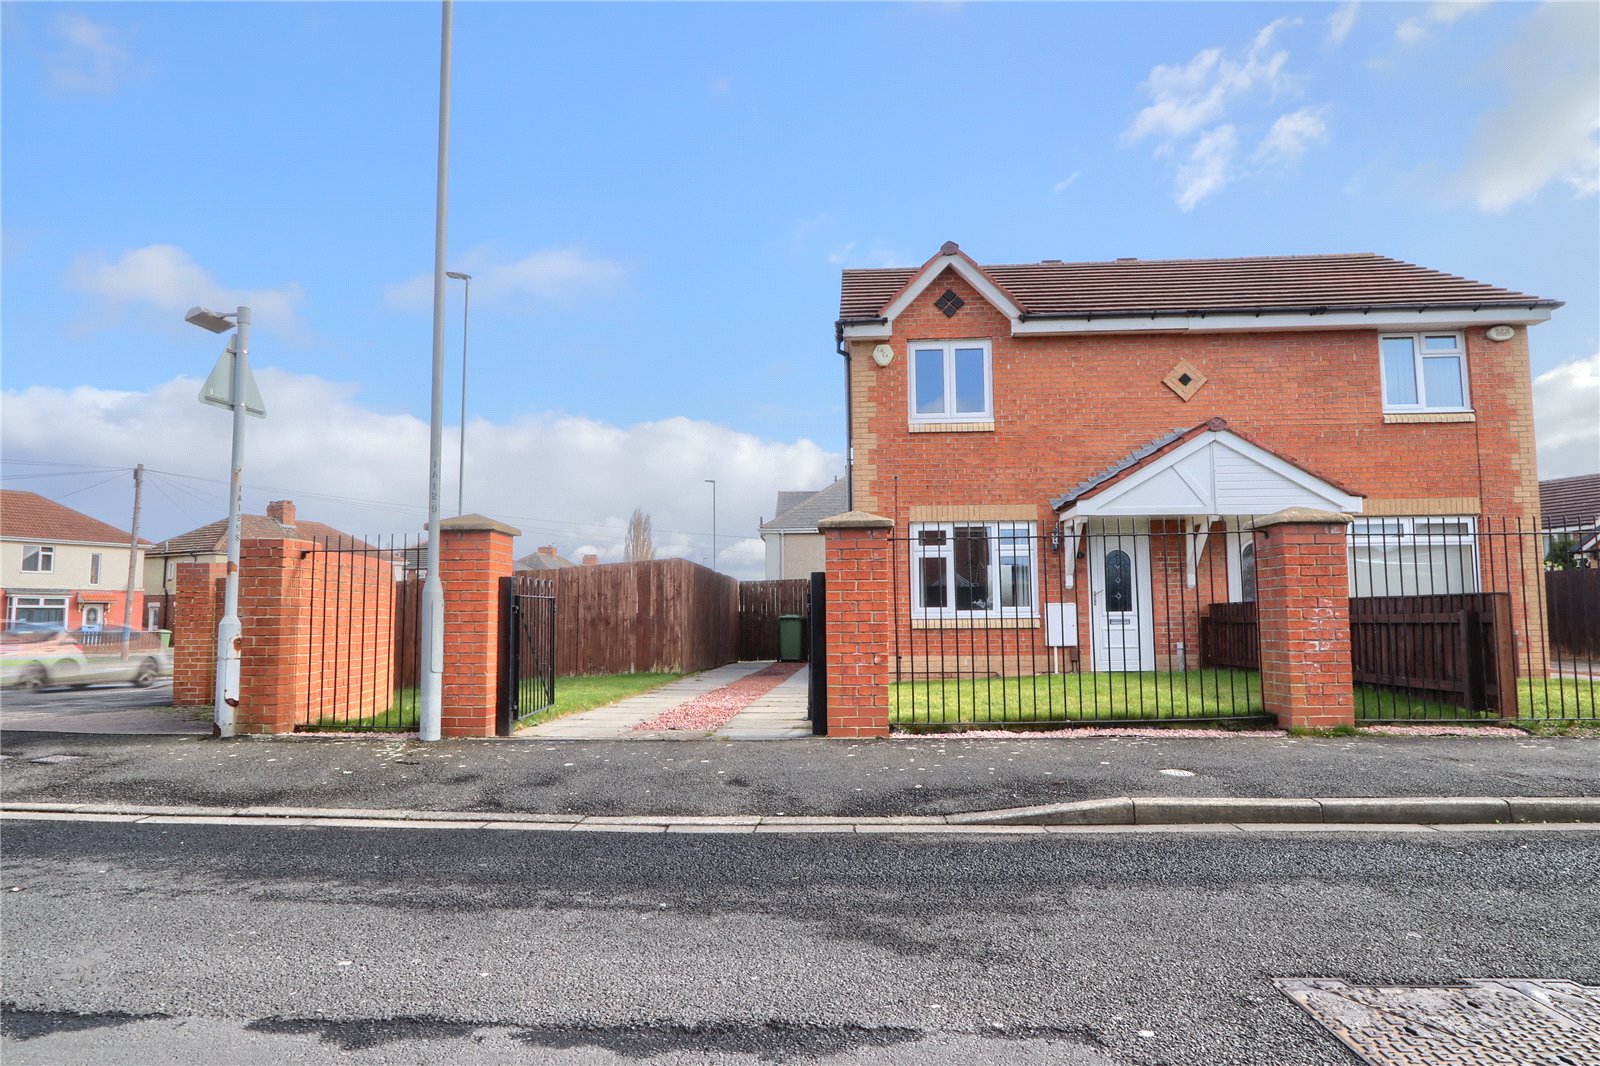 2 bed house for sale in Alpine Way, Norton - Property Image 1